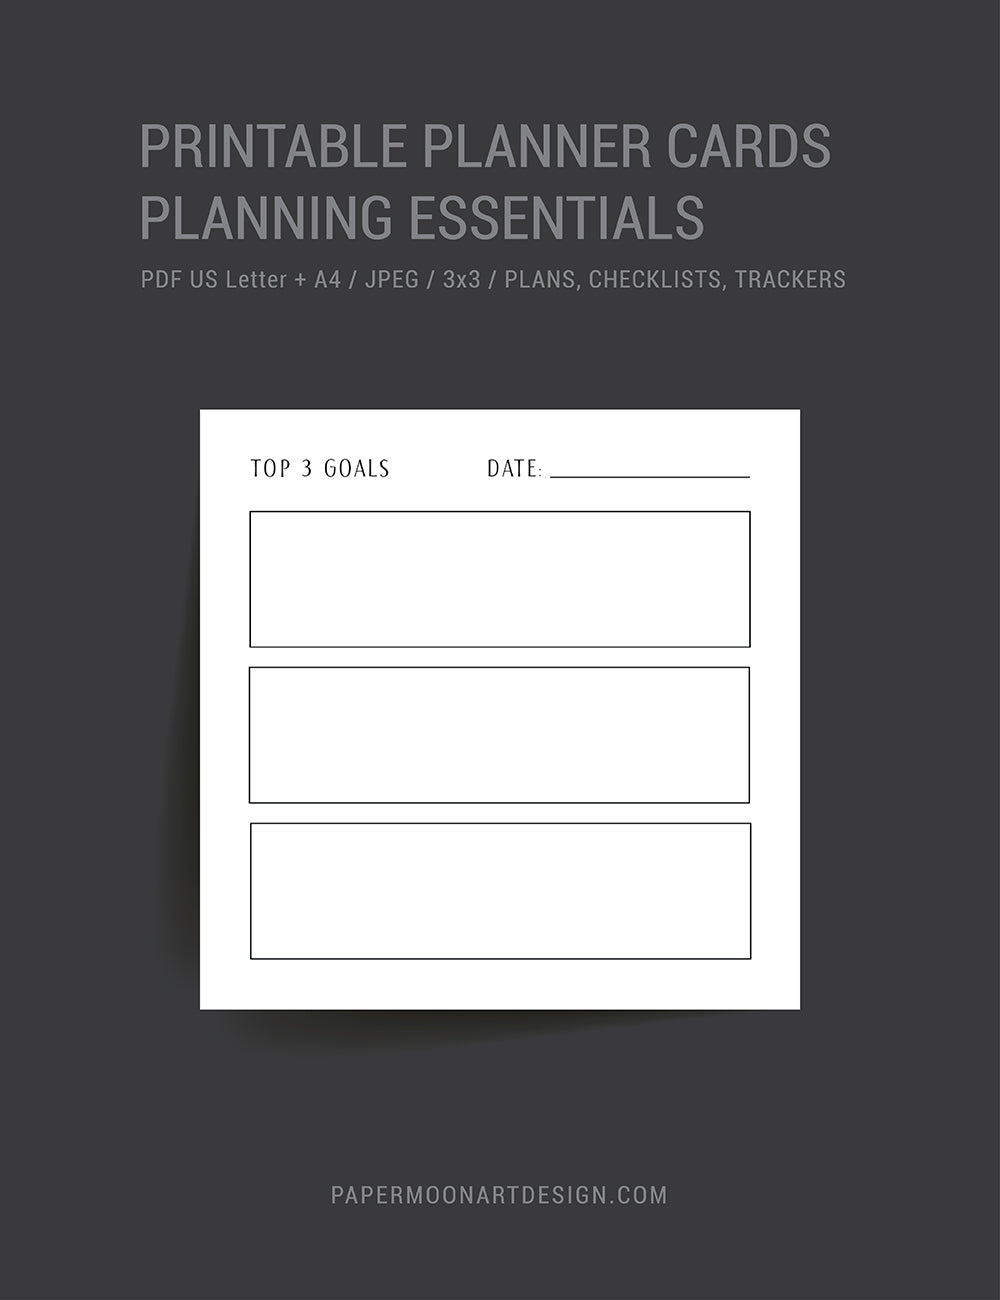 Planning Essentials | 3x3 | Printable Journal & Planner Cards | Daily Plans, Weekly Plans, Checklists, Habit Trackers, To Do Lists, Notes | Minimal Aesthetic | Clean Design | PAPER MOON Art & Design